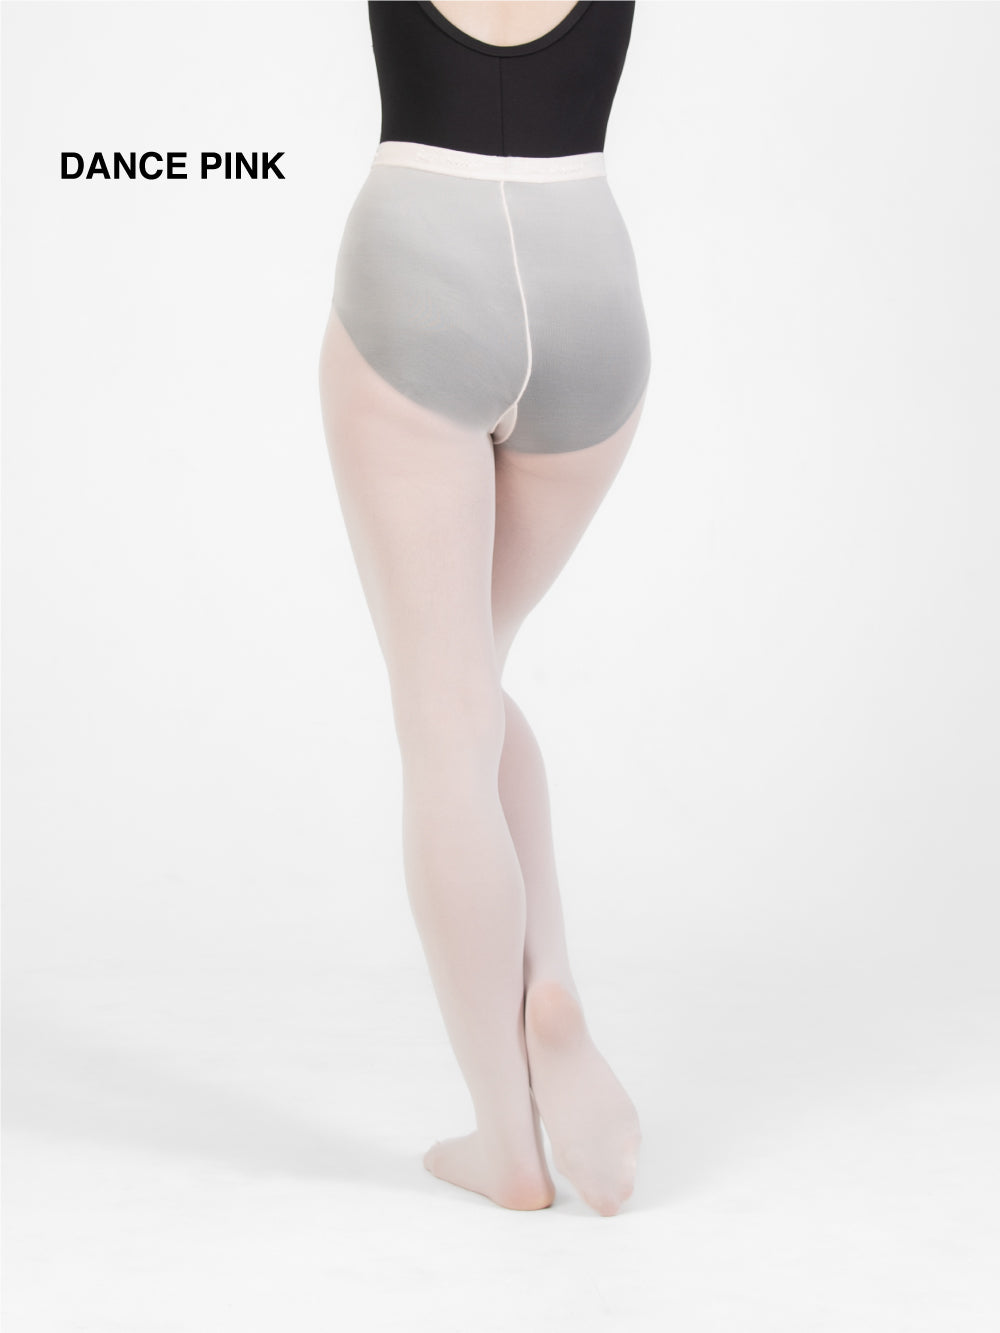 DANCE TIGHTS Ballet Pink/Tan(Skin Tone) TRIO PACK Footed